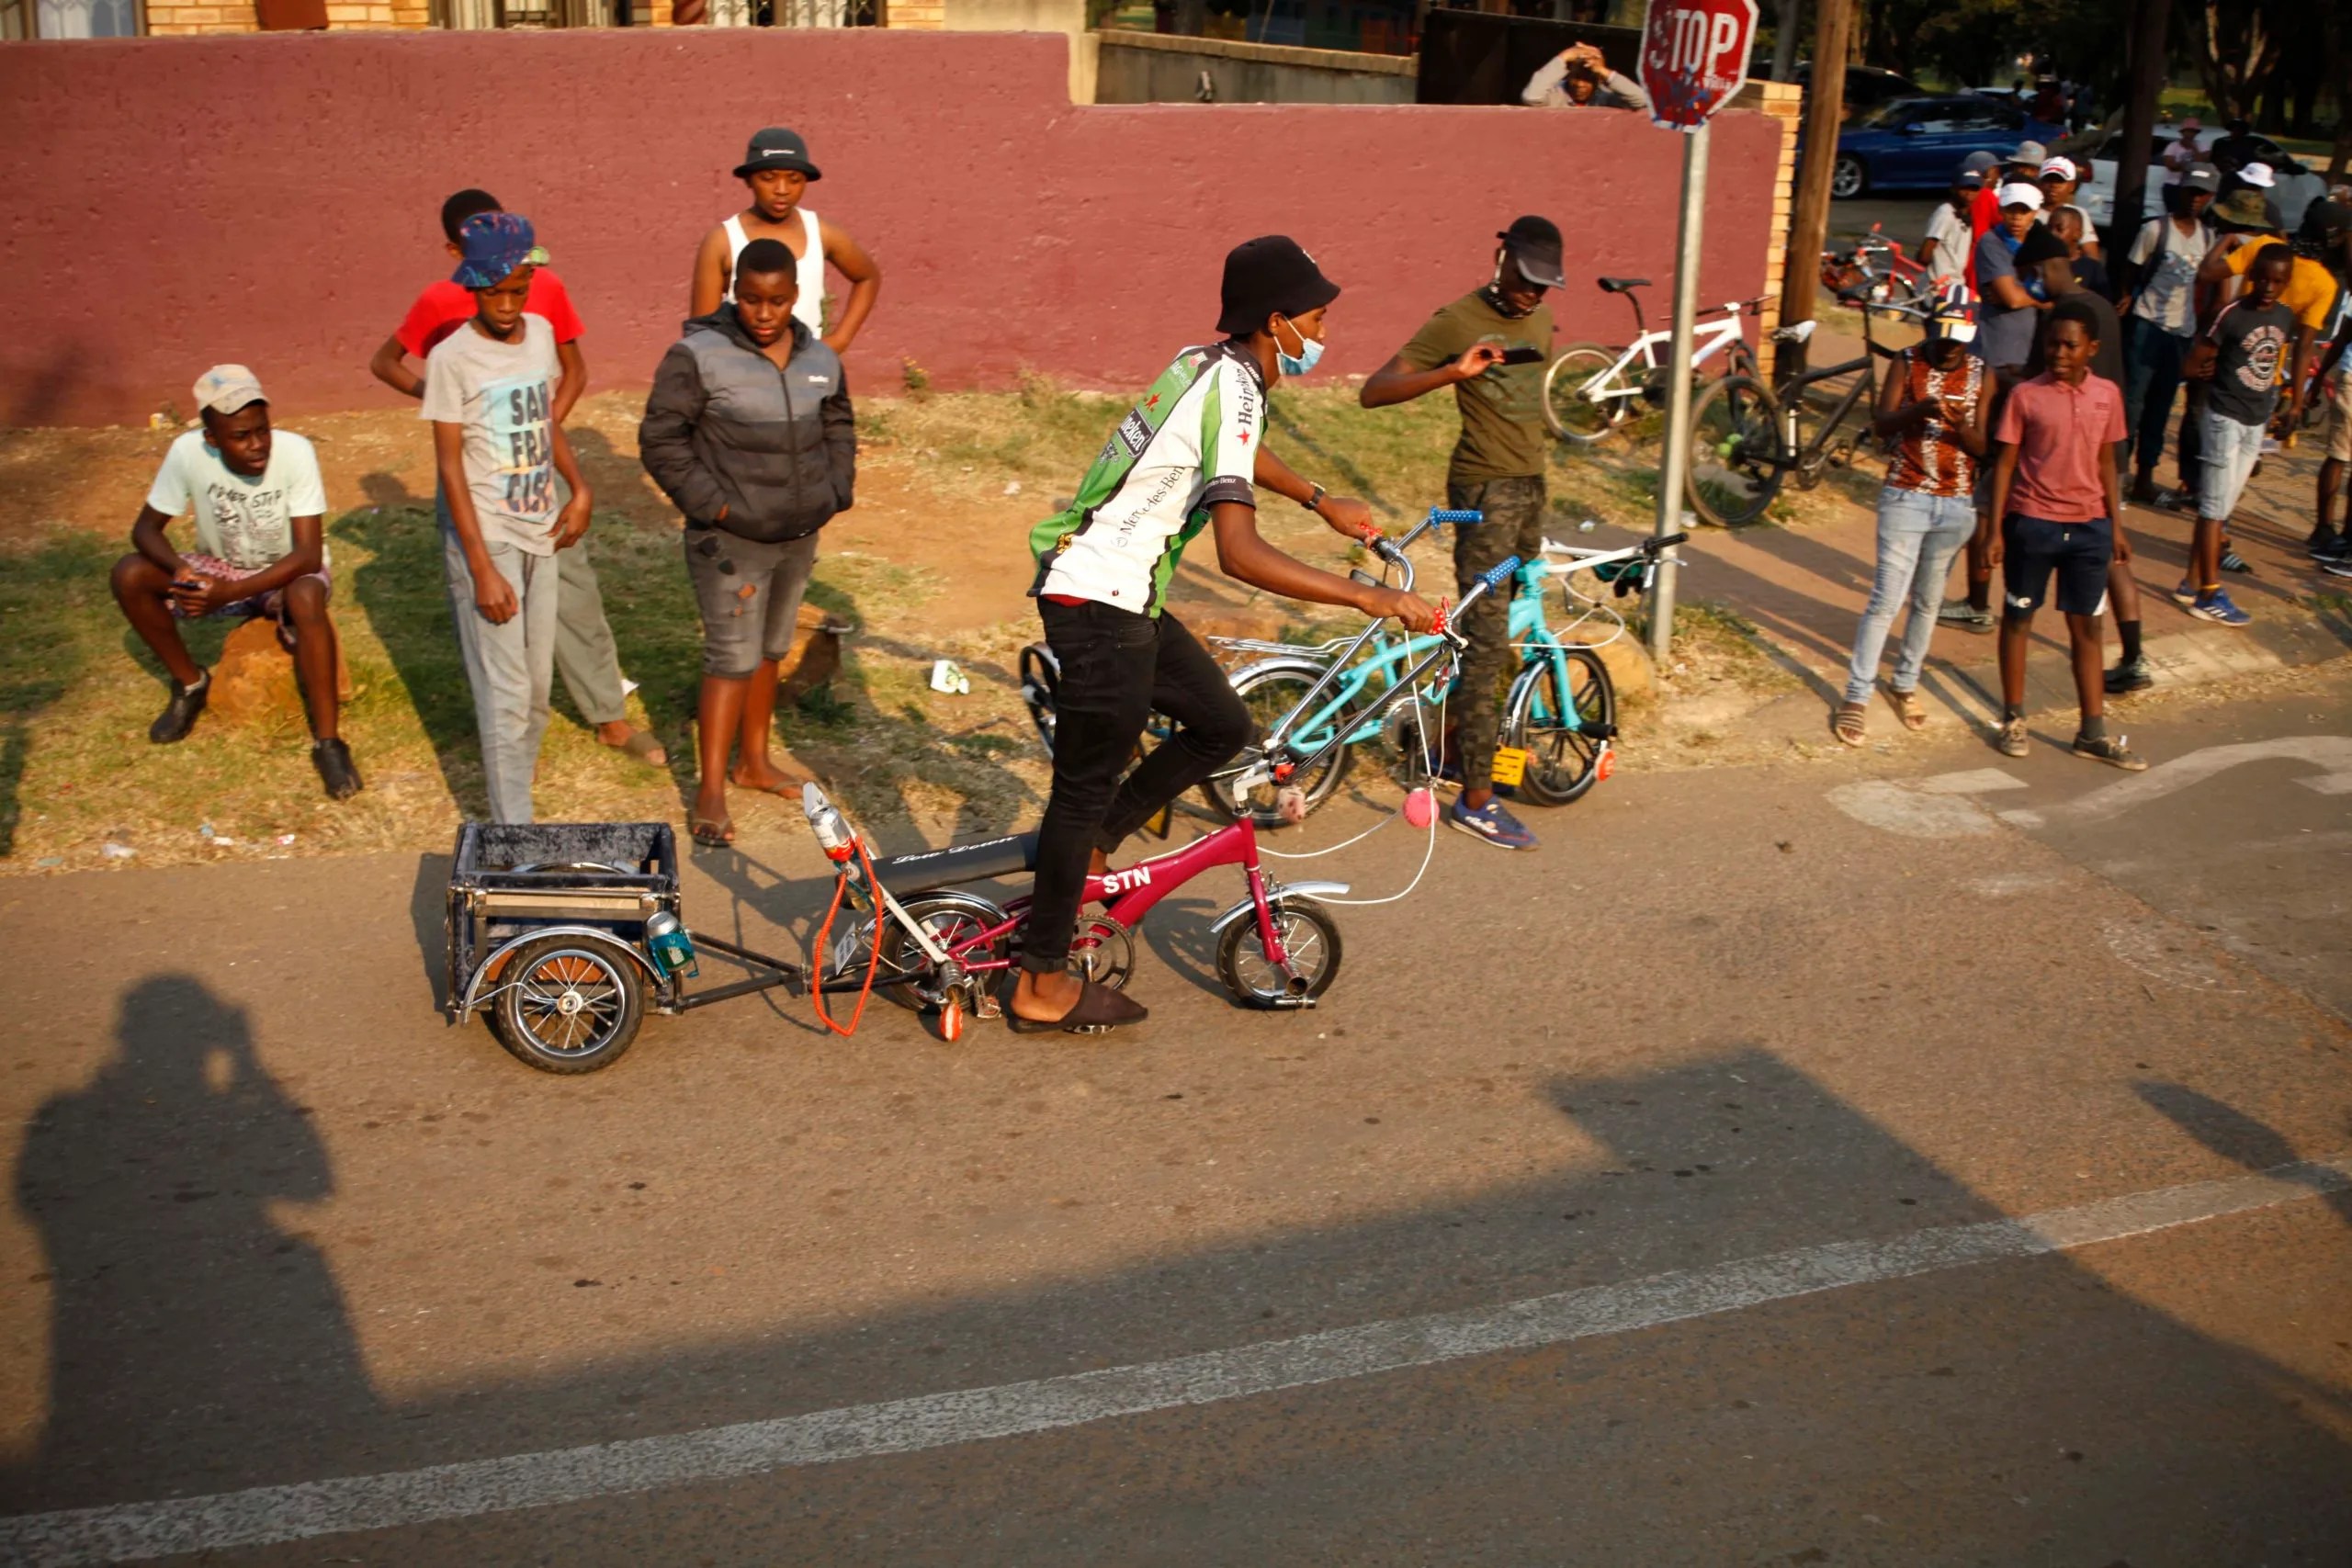 South African Township Boys Spin Bikes